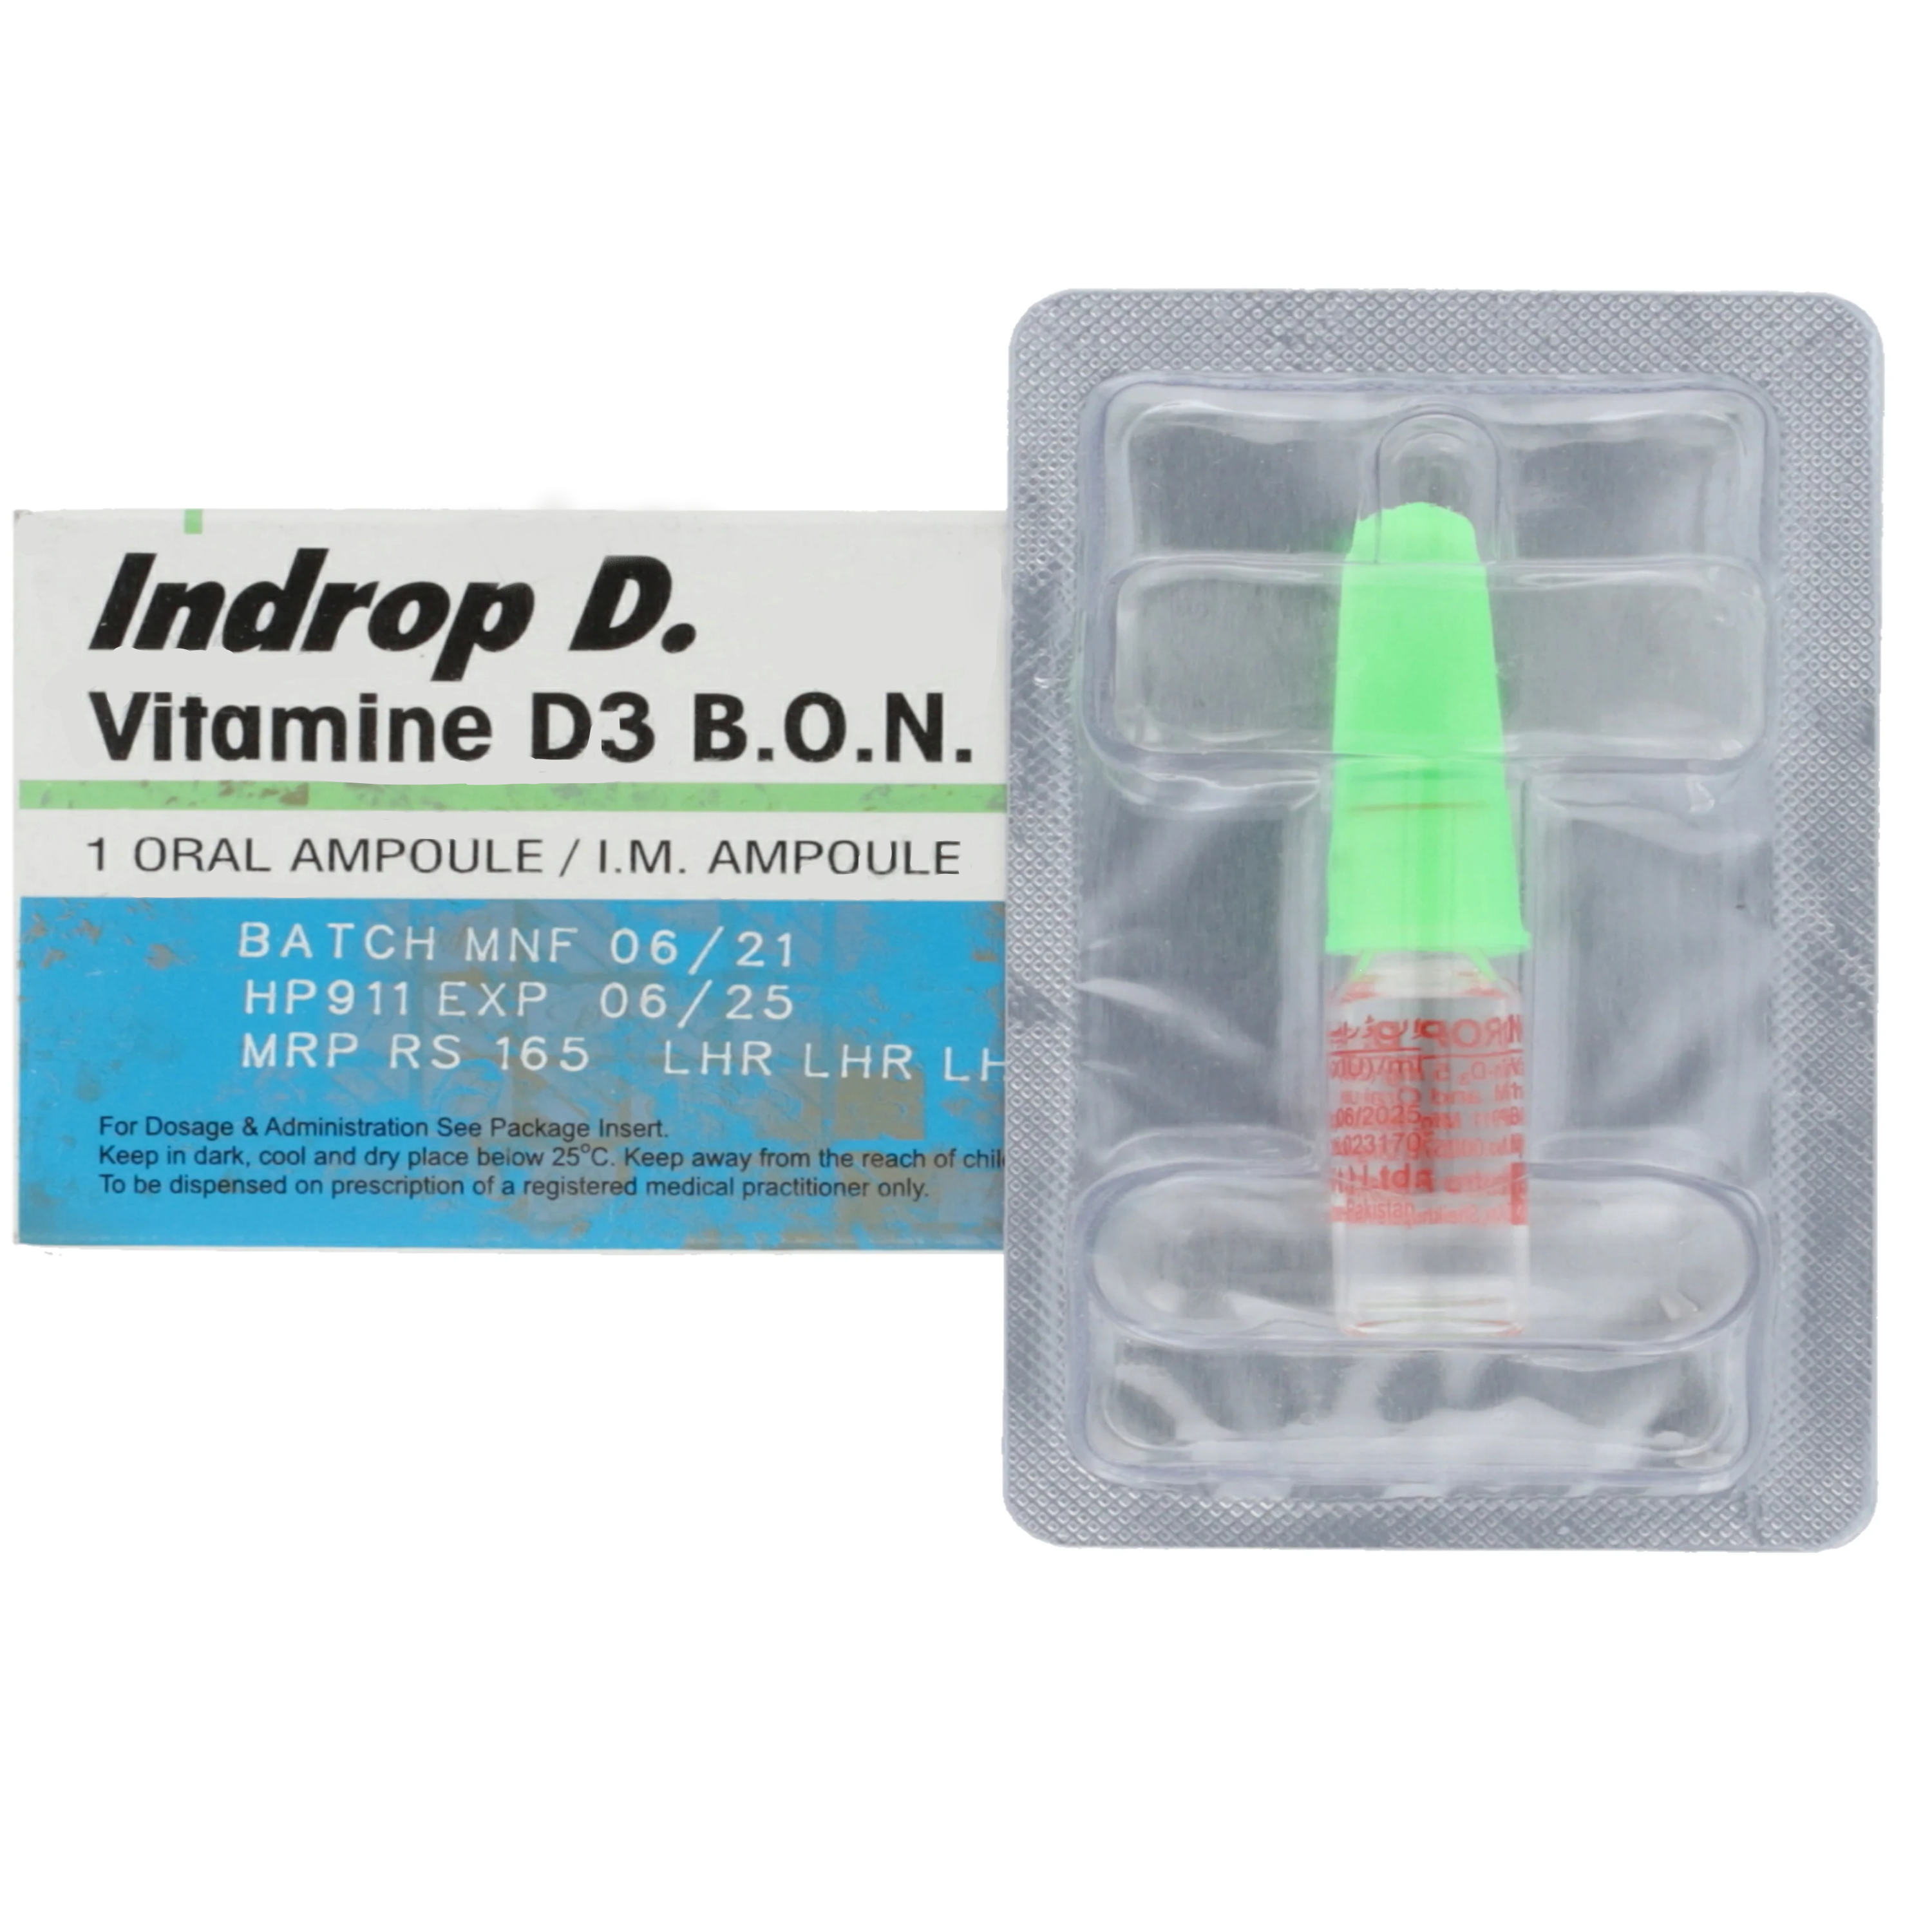 Indrop D